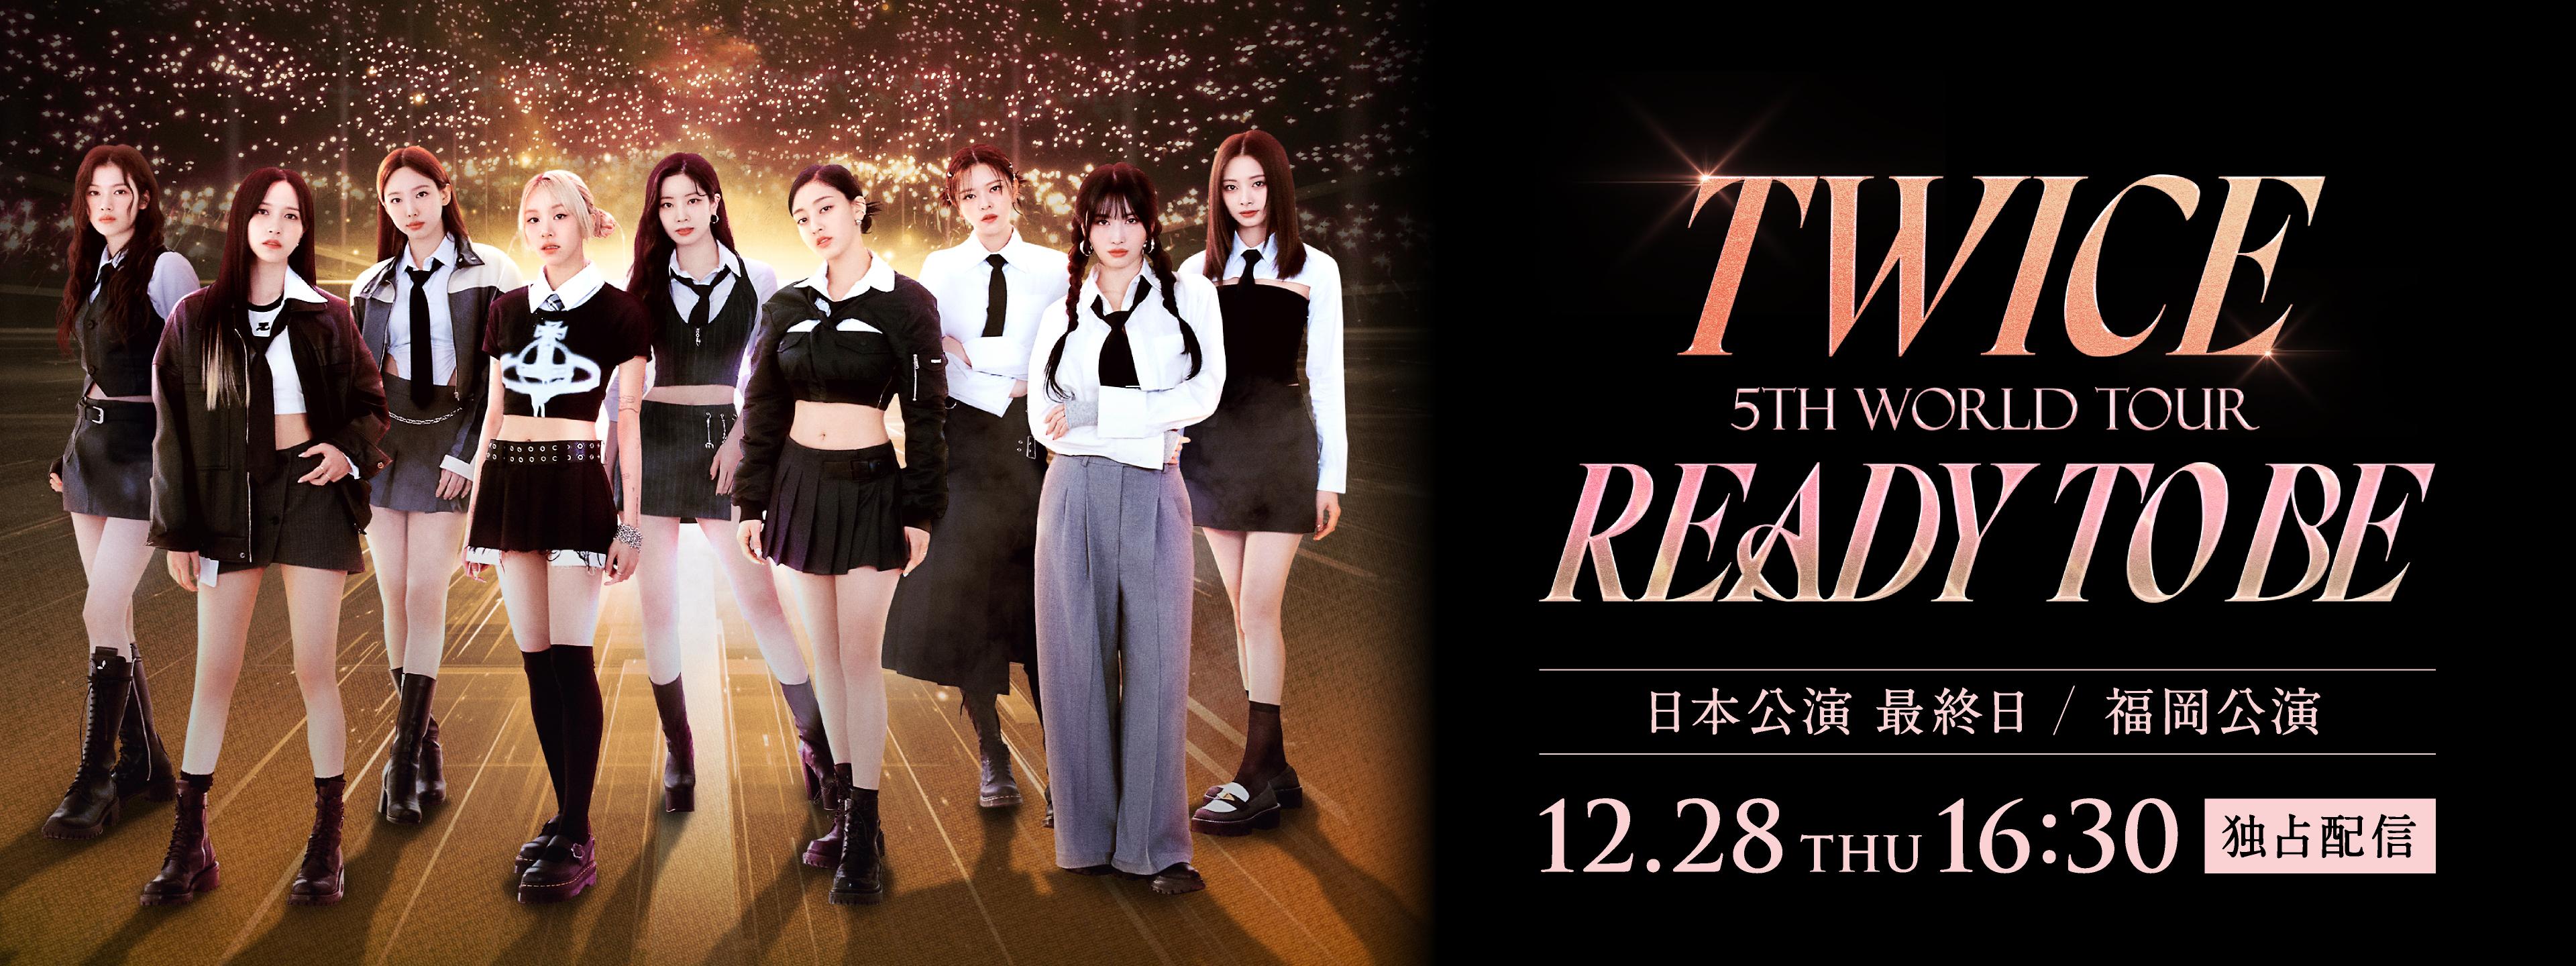 TWICE 5TH WORLD TOUR ‘READY TO BE’ in JAPAN